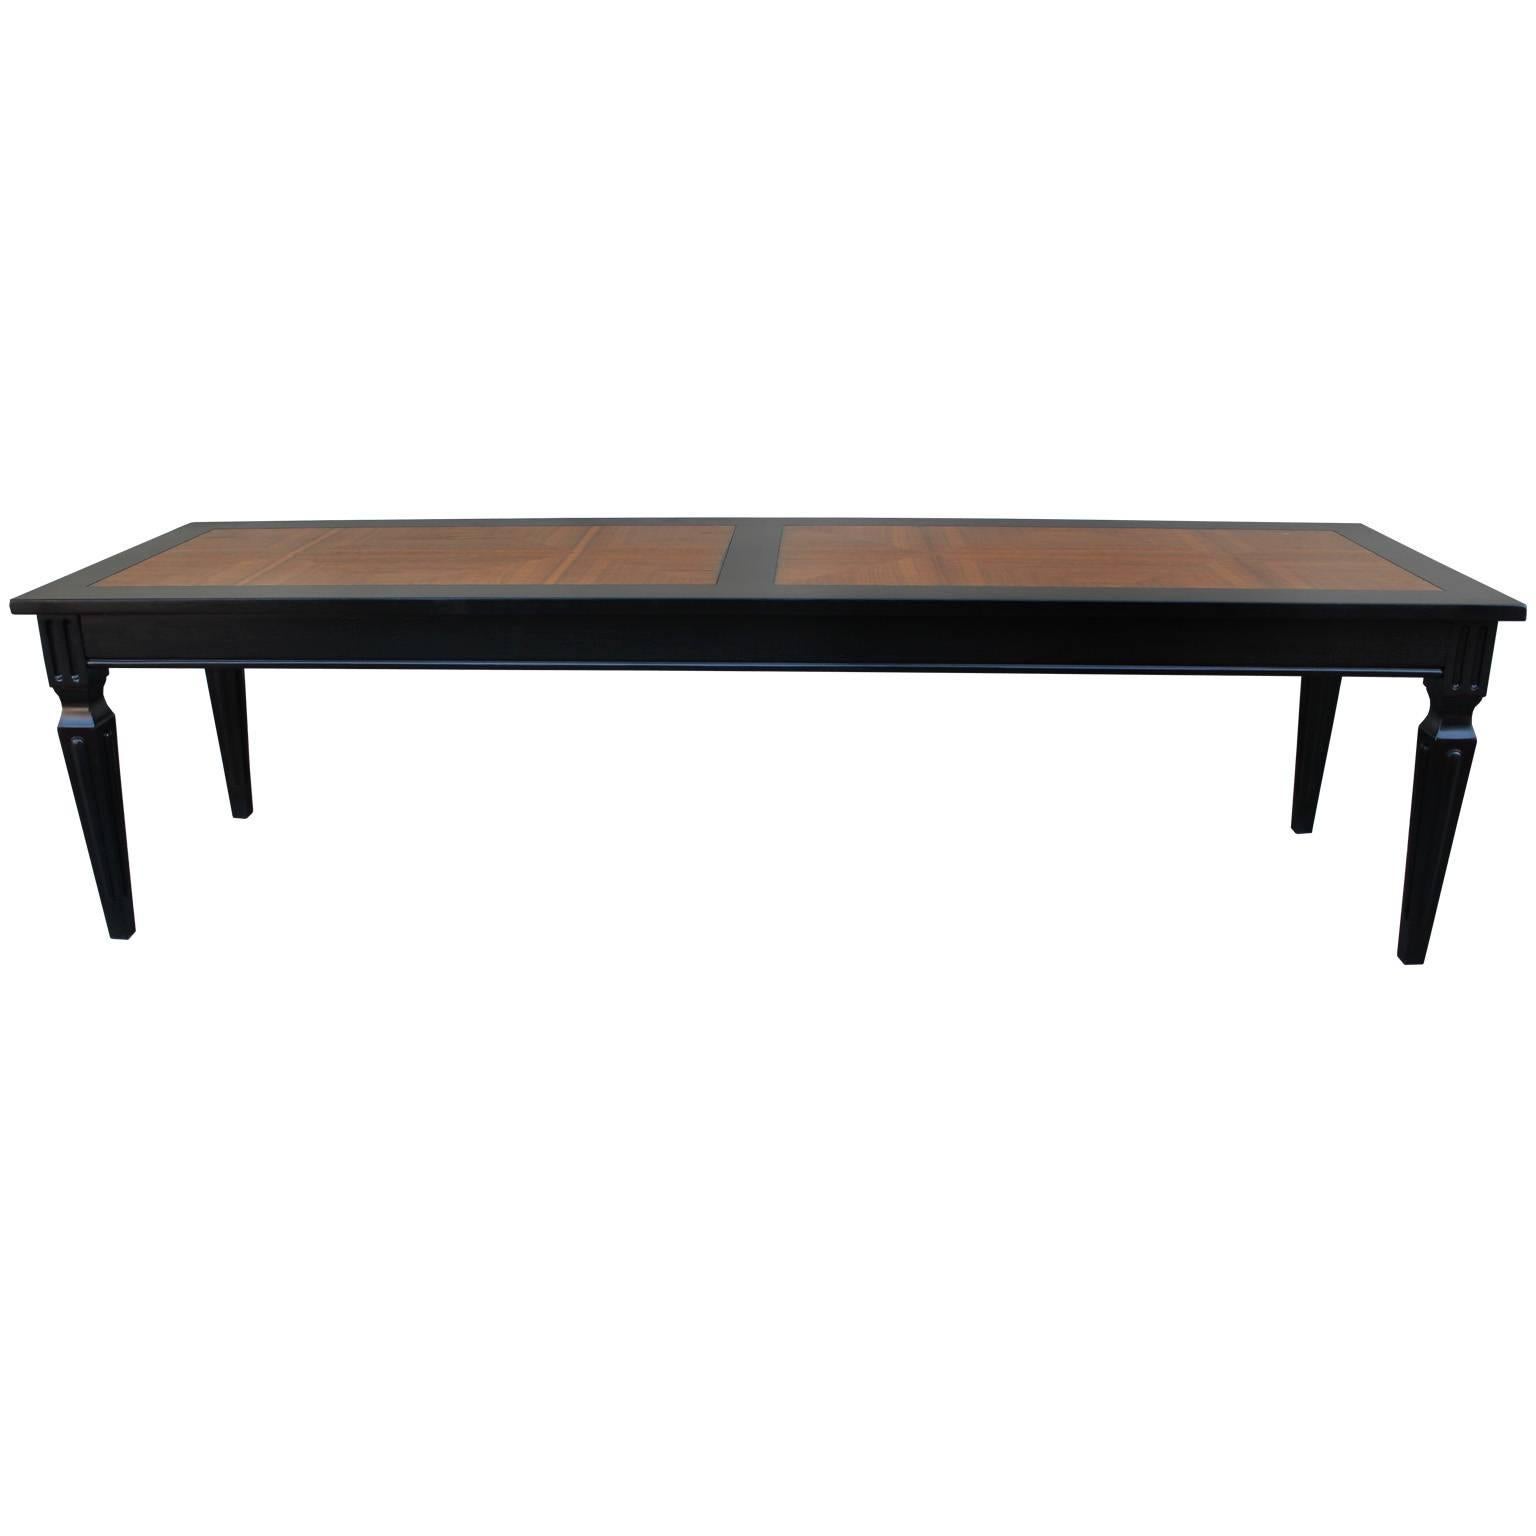 Elegant coffee table by Baker Furniture. Table base is freshly finished in a deep ebony stain. Tabletop is beautifully grained inlay or parquet. Legs have the perfect amount of detail. Excellent in a transitional, Mid-Century, or Hollywood Regency